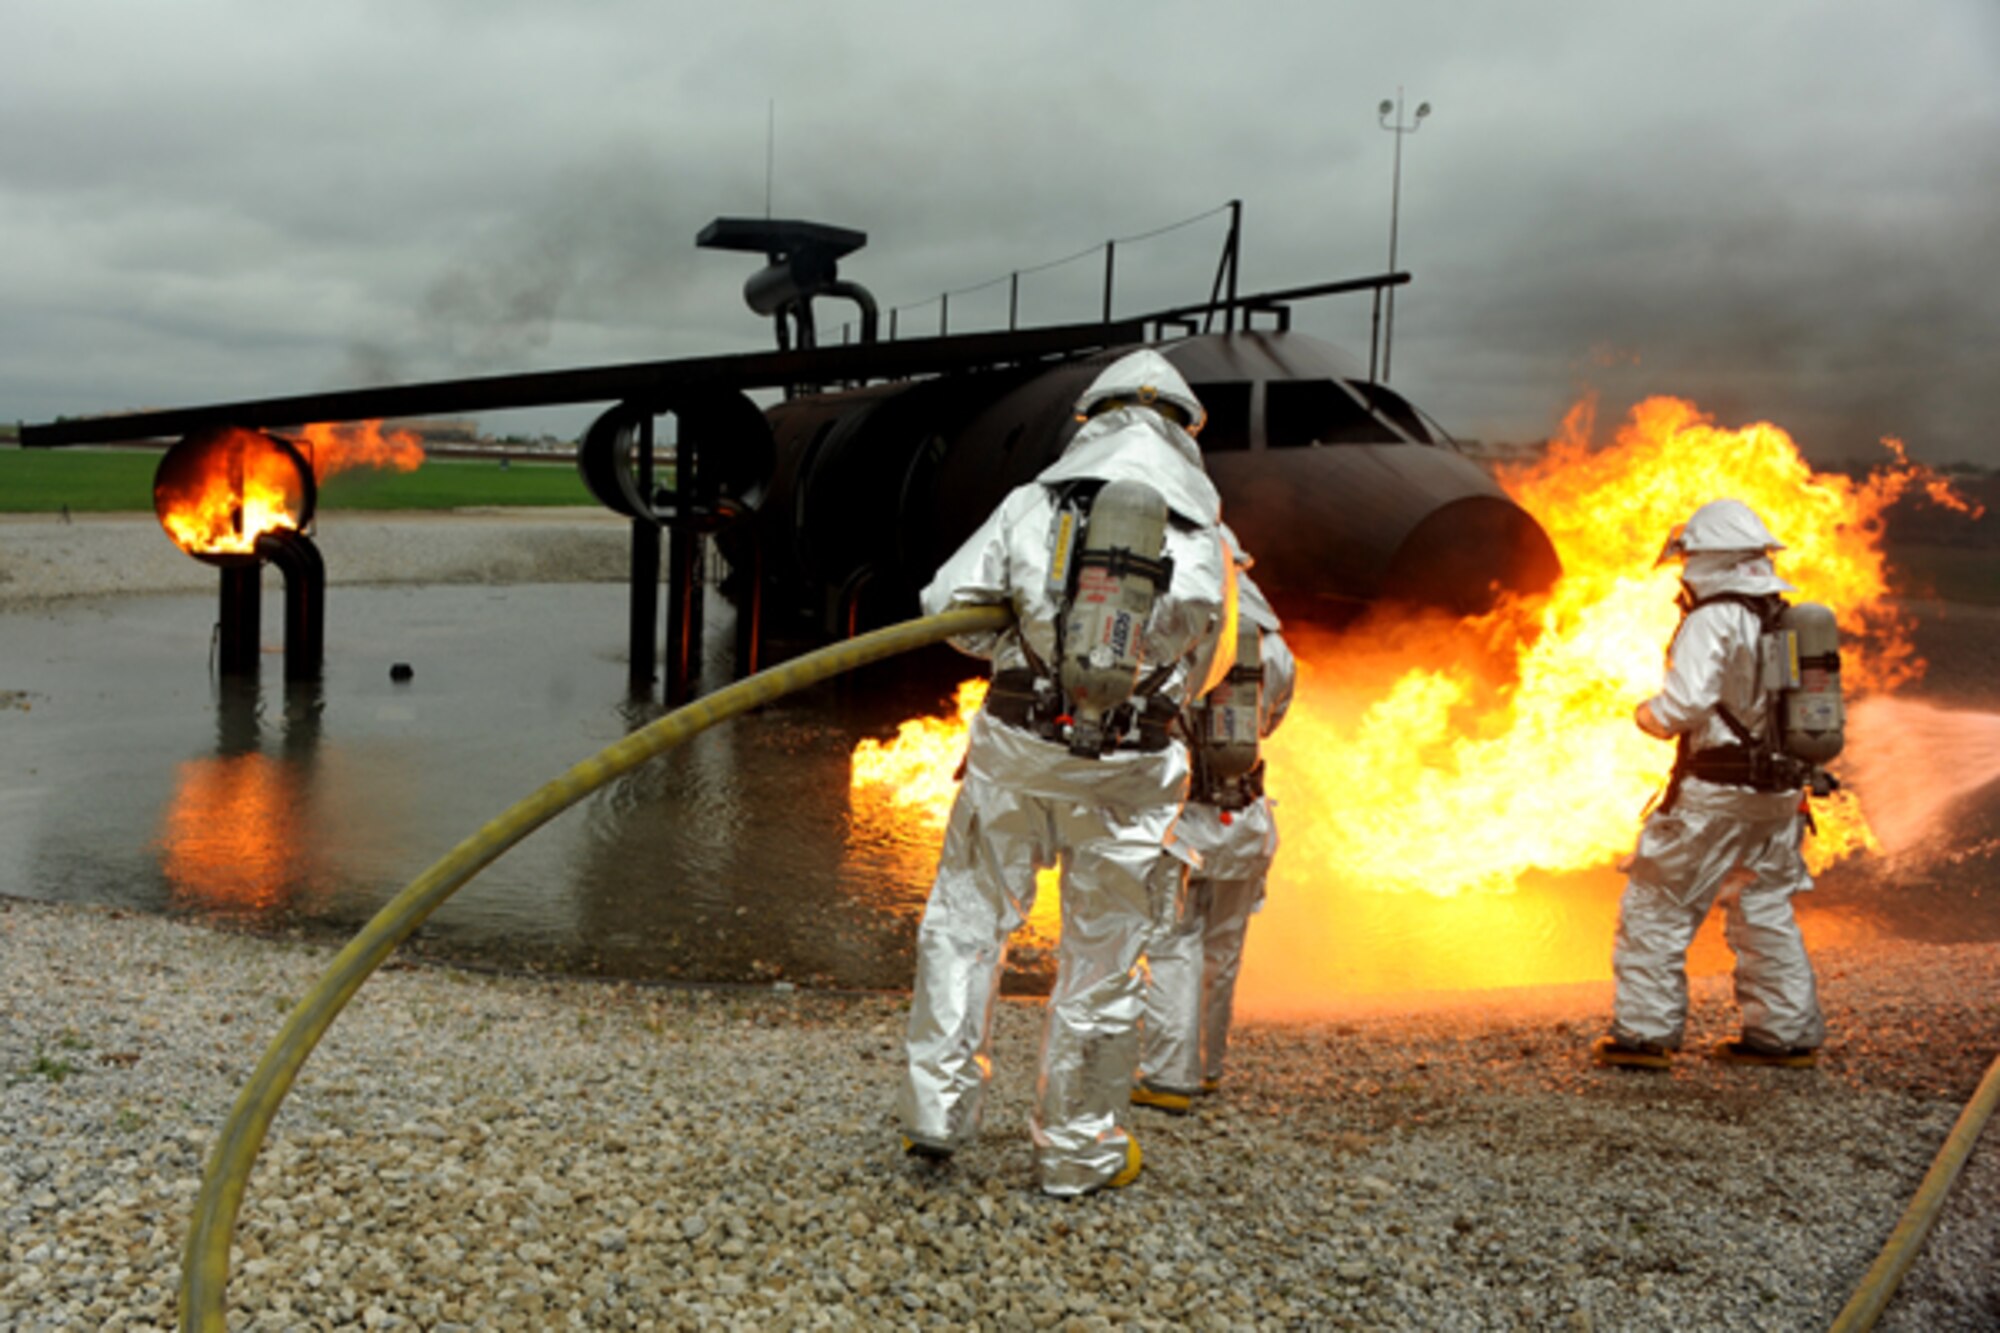 OFFUTT AIR FORCE BASE Neb. -- Offutt firefighters extinguish the flames oin a simulated aircraft fire trainer during a joint training exercise here May 6. Firefighters from Offutt, Eppley airfield and guard and reserve units participated in the training.

U.S. Air Force photo by Josh Plueger